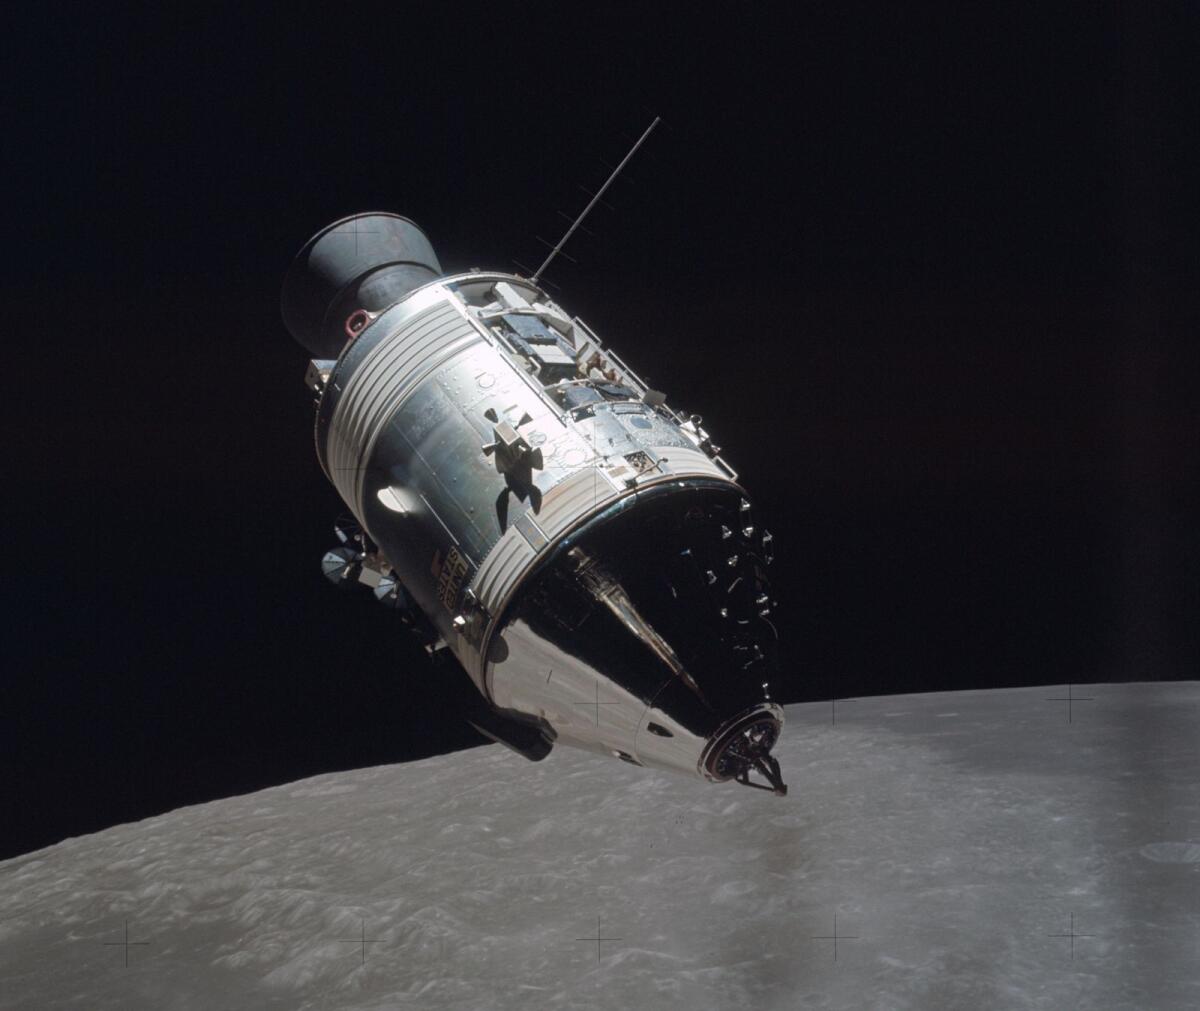 A photo provided by NASA shows the Apollo 17 command and service module in orbit around the moon on December 14, 1972. (NASA via The New York Times)